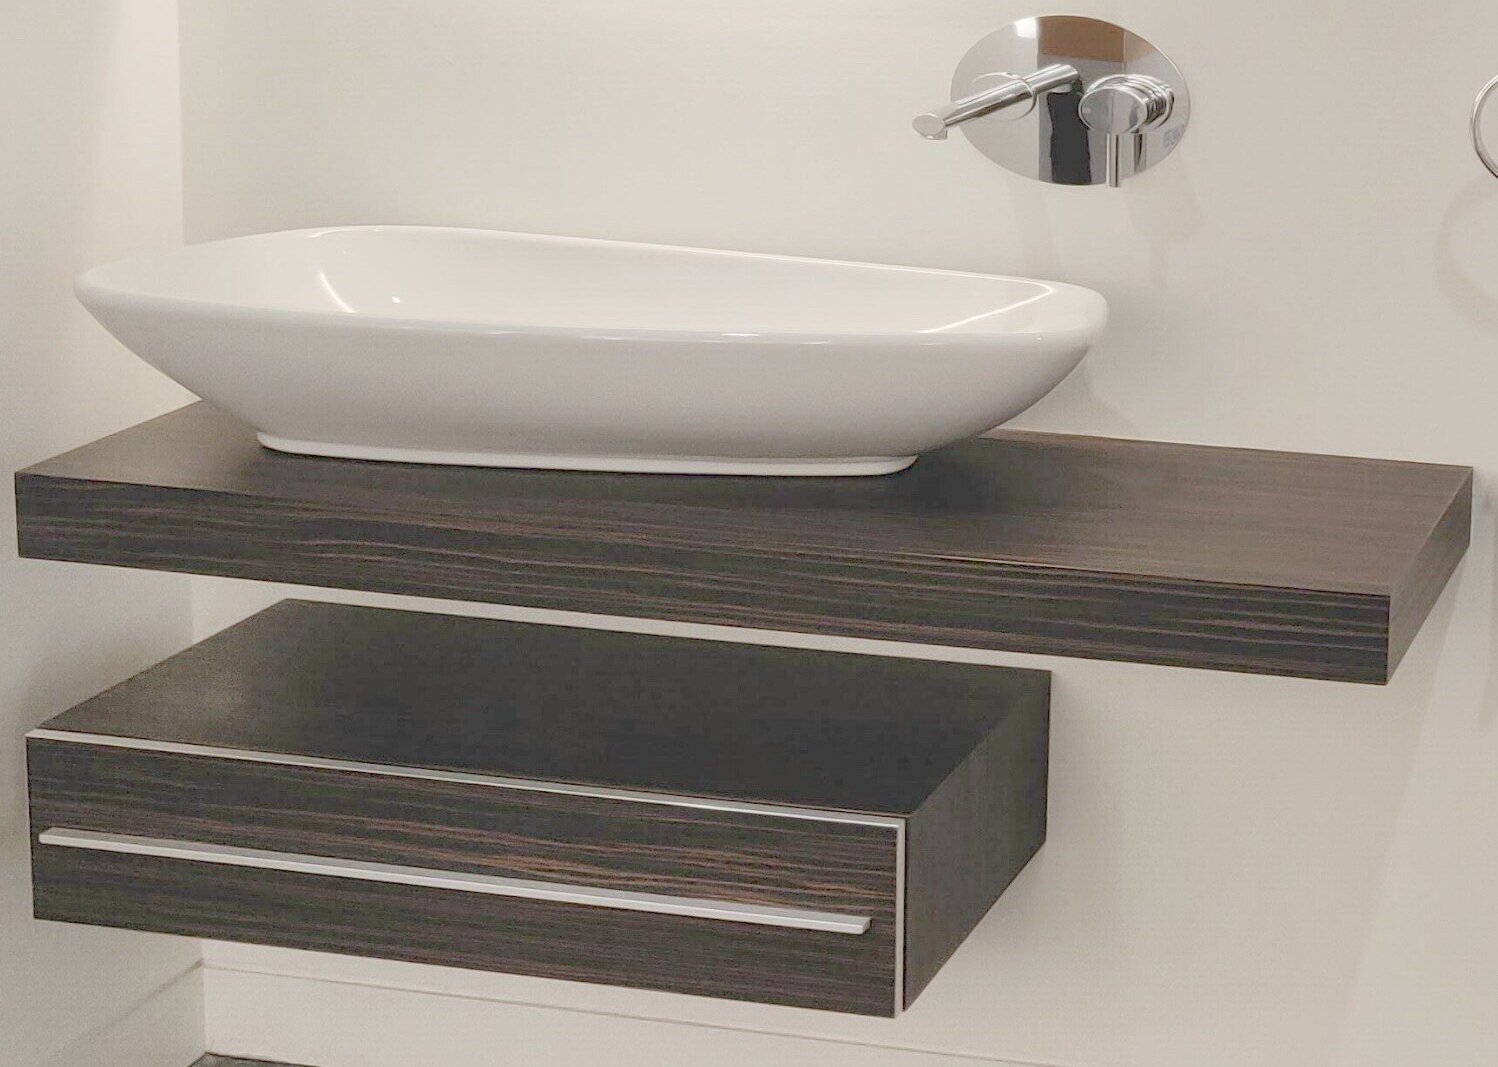 Can we do this sink style?